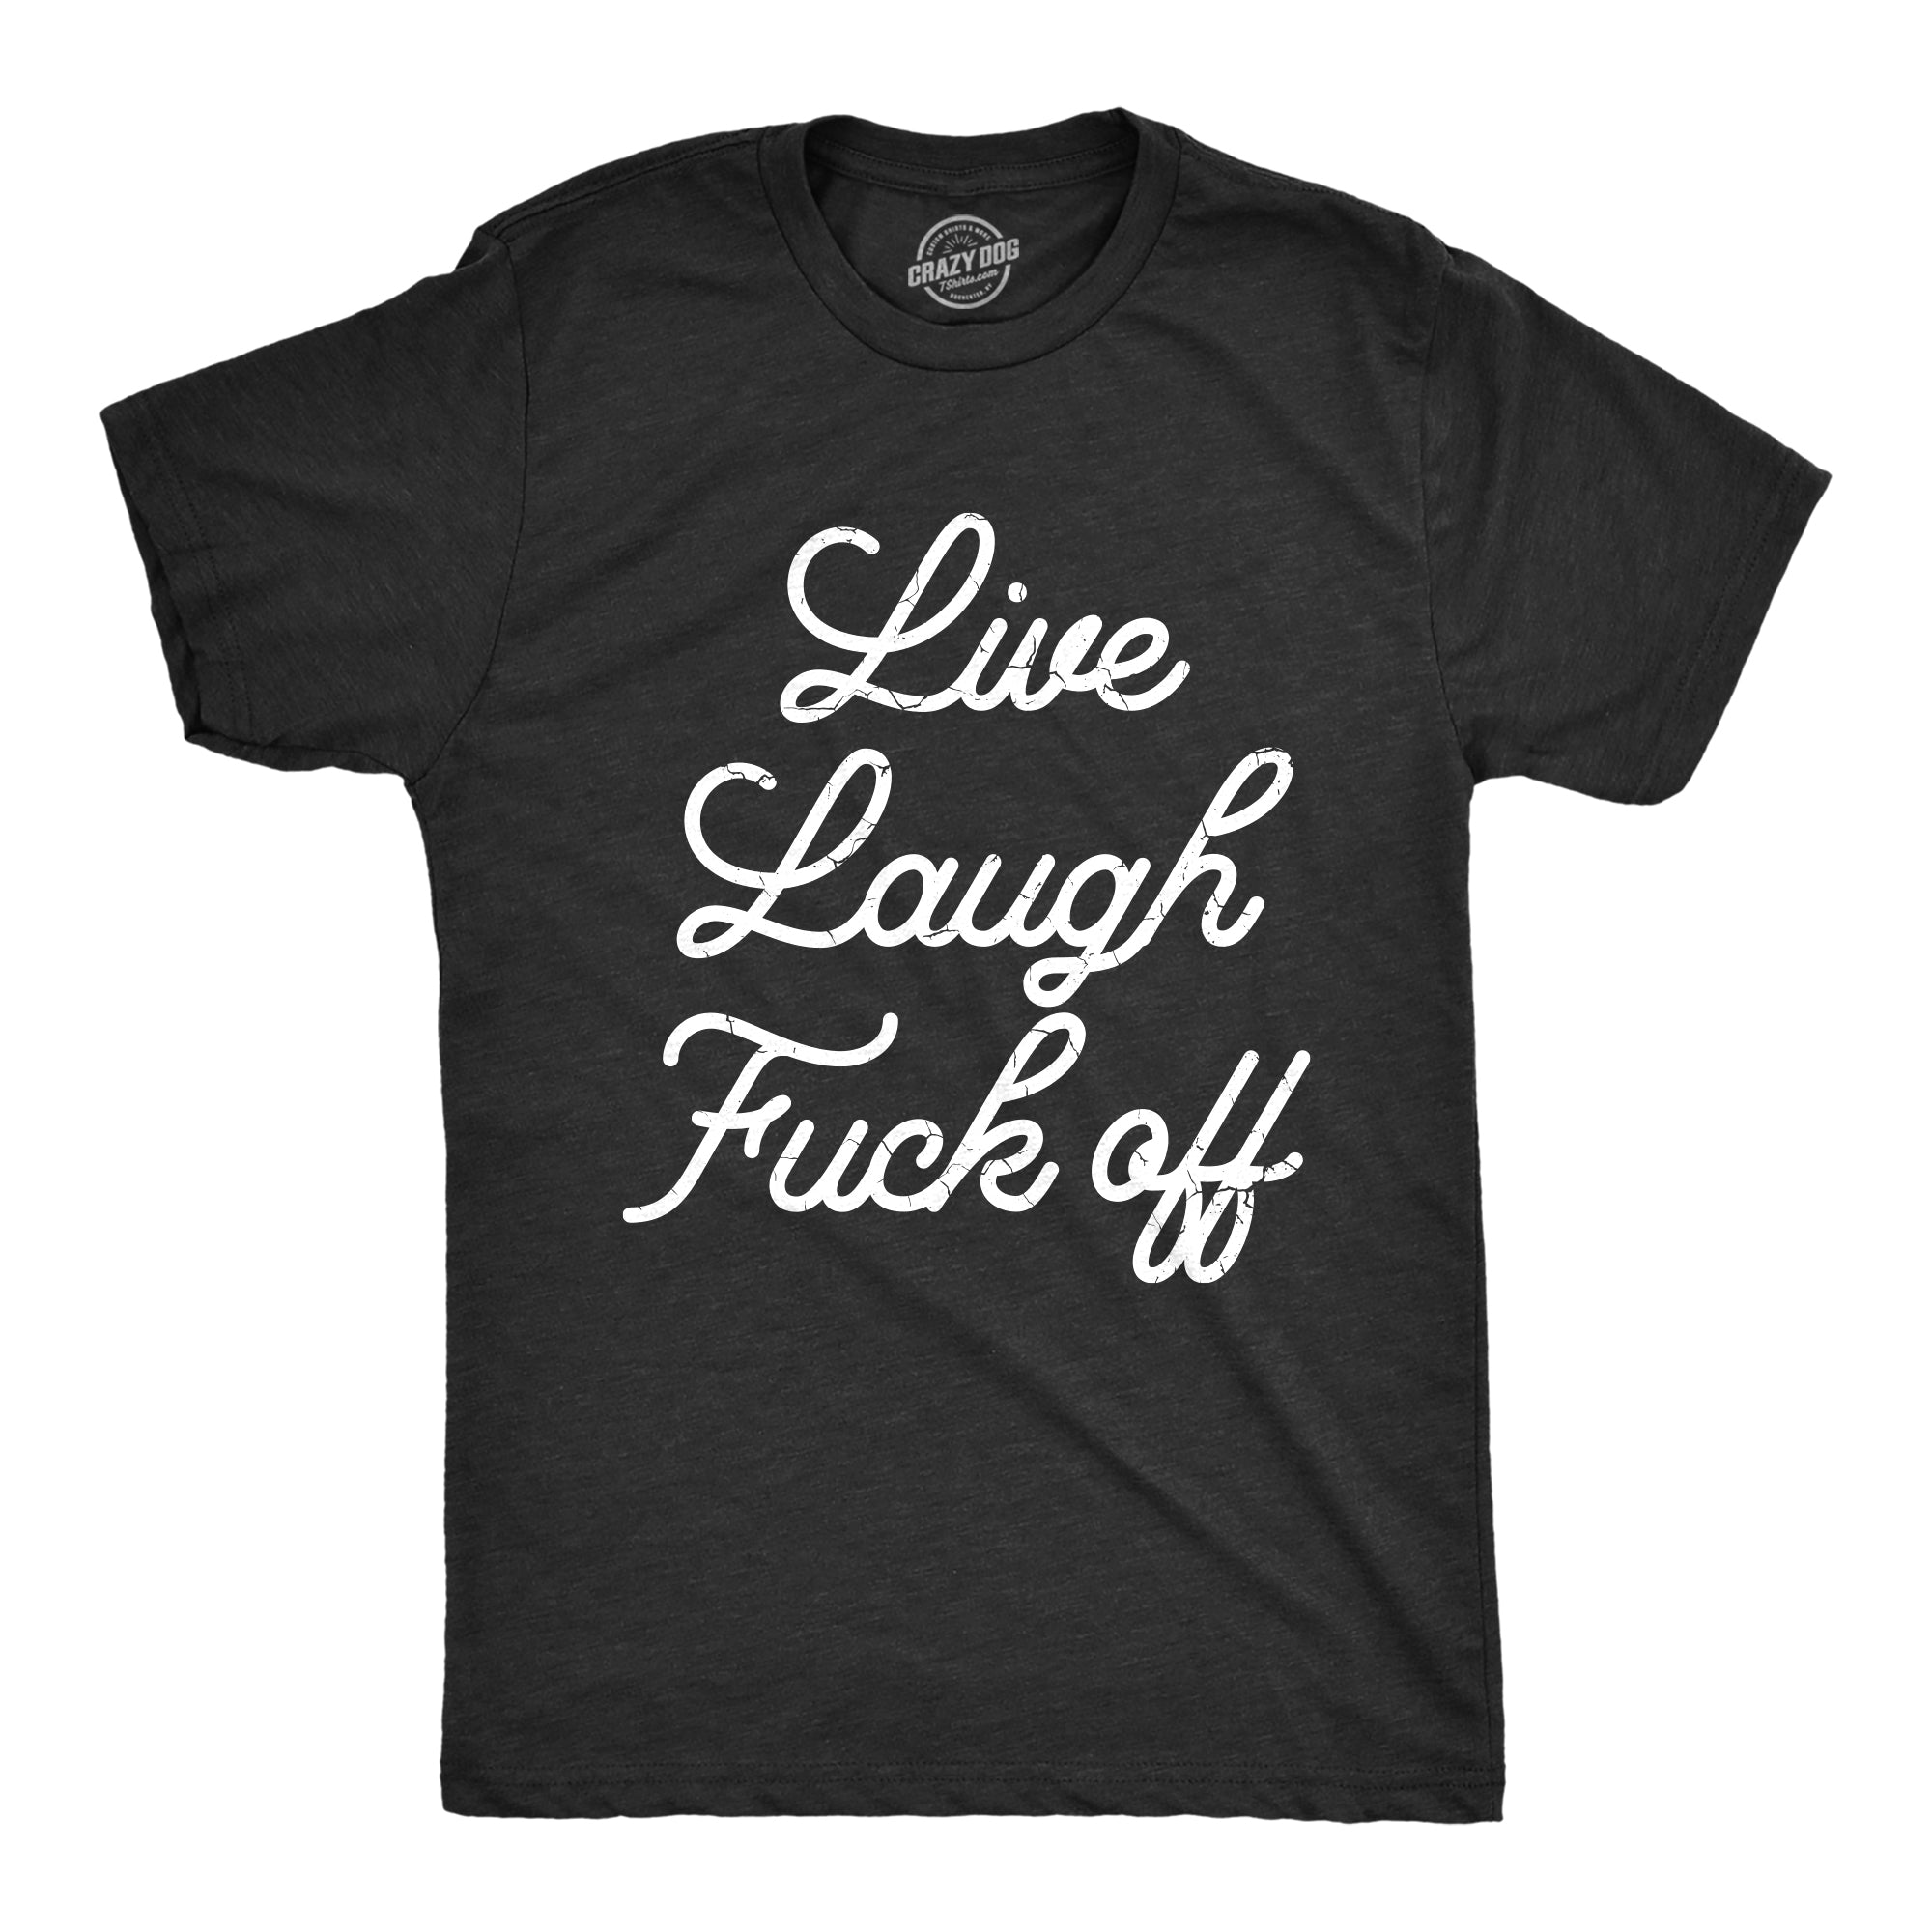 Funny Heather Black - FUCKOFF Live Laugh Fuck Off Mens T Shirt Nerdy Sarcastic Tee